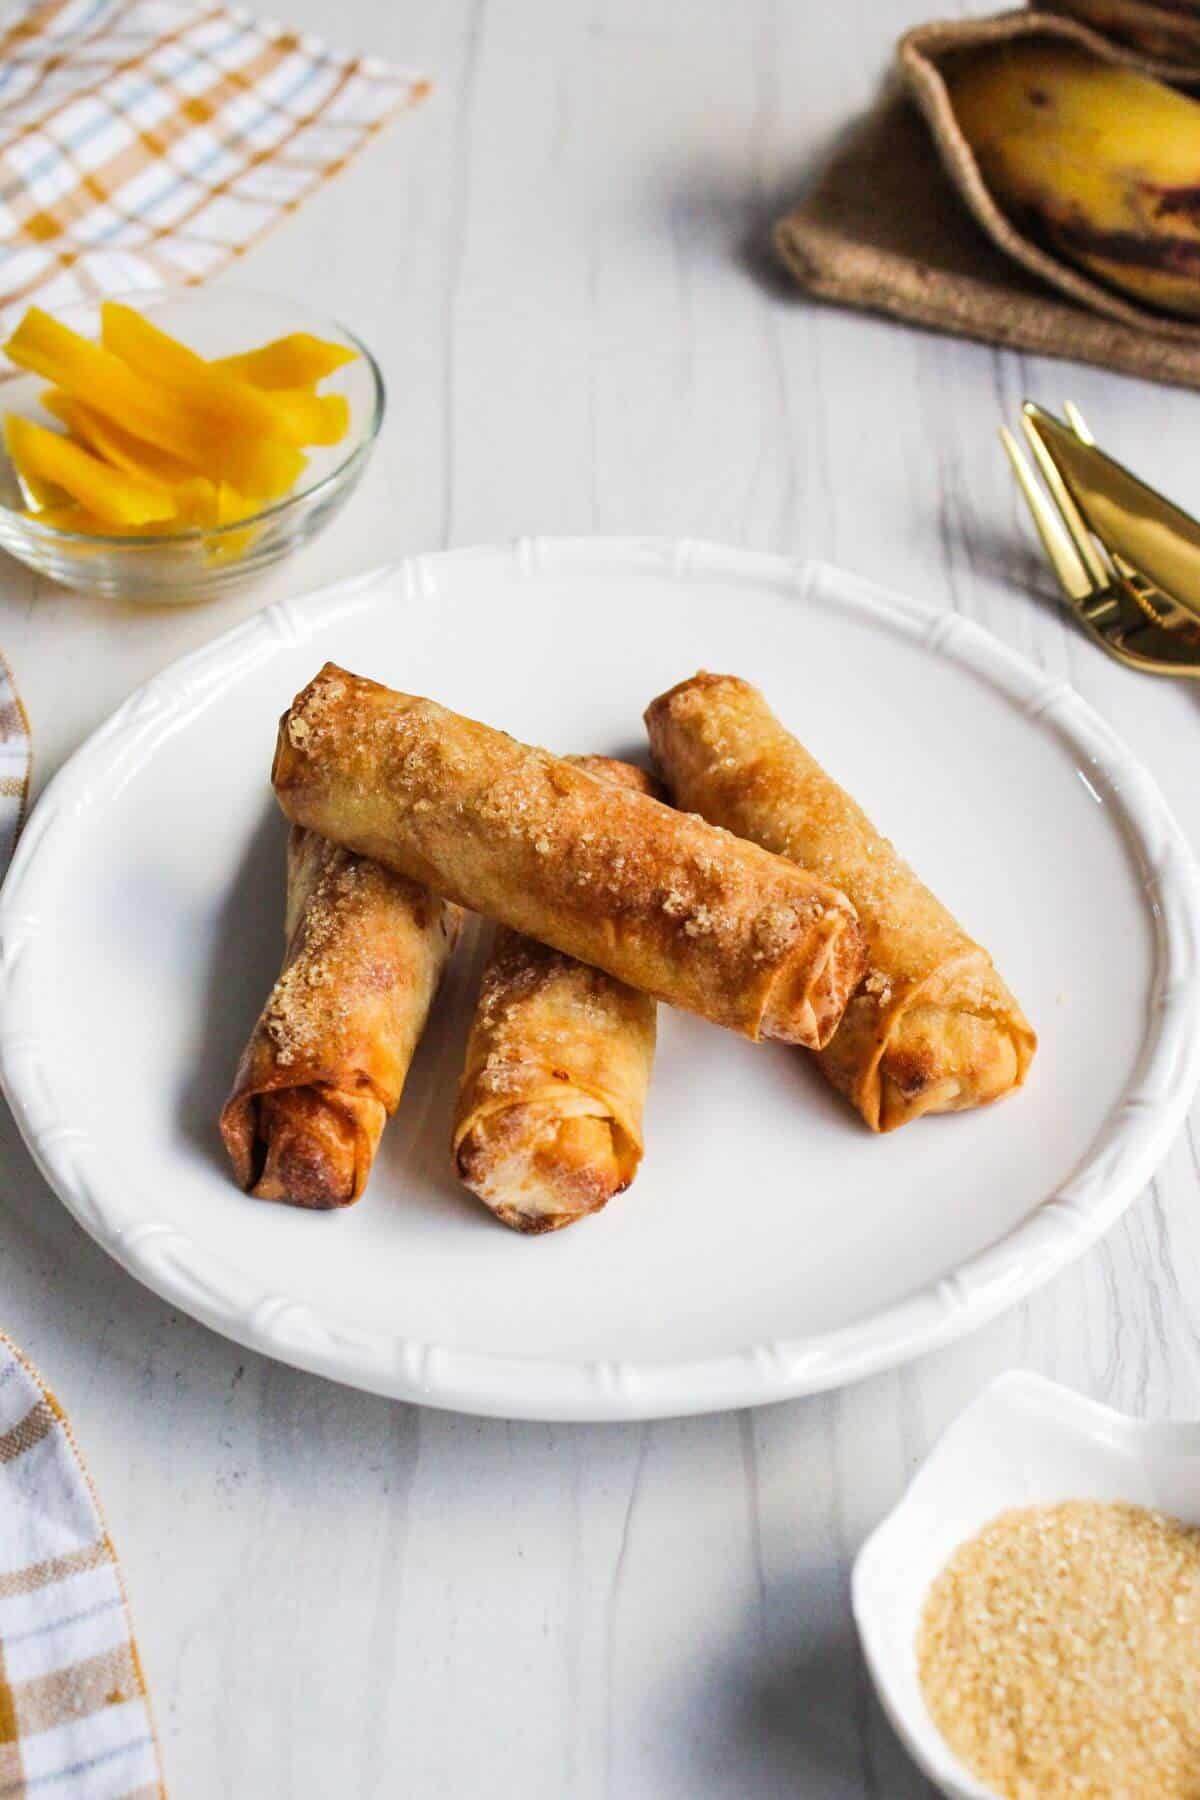 Banana turon spring roll rolls on a white plate with a fork.